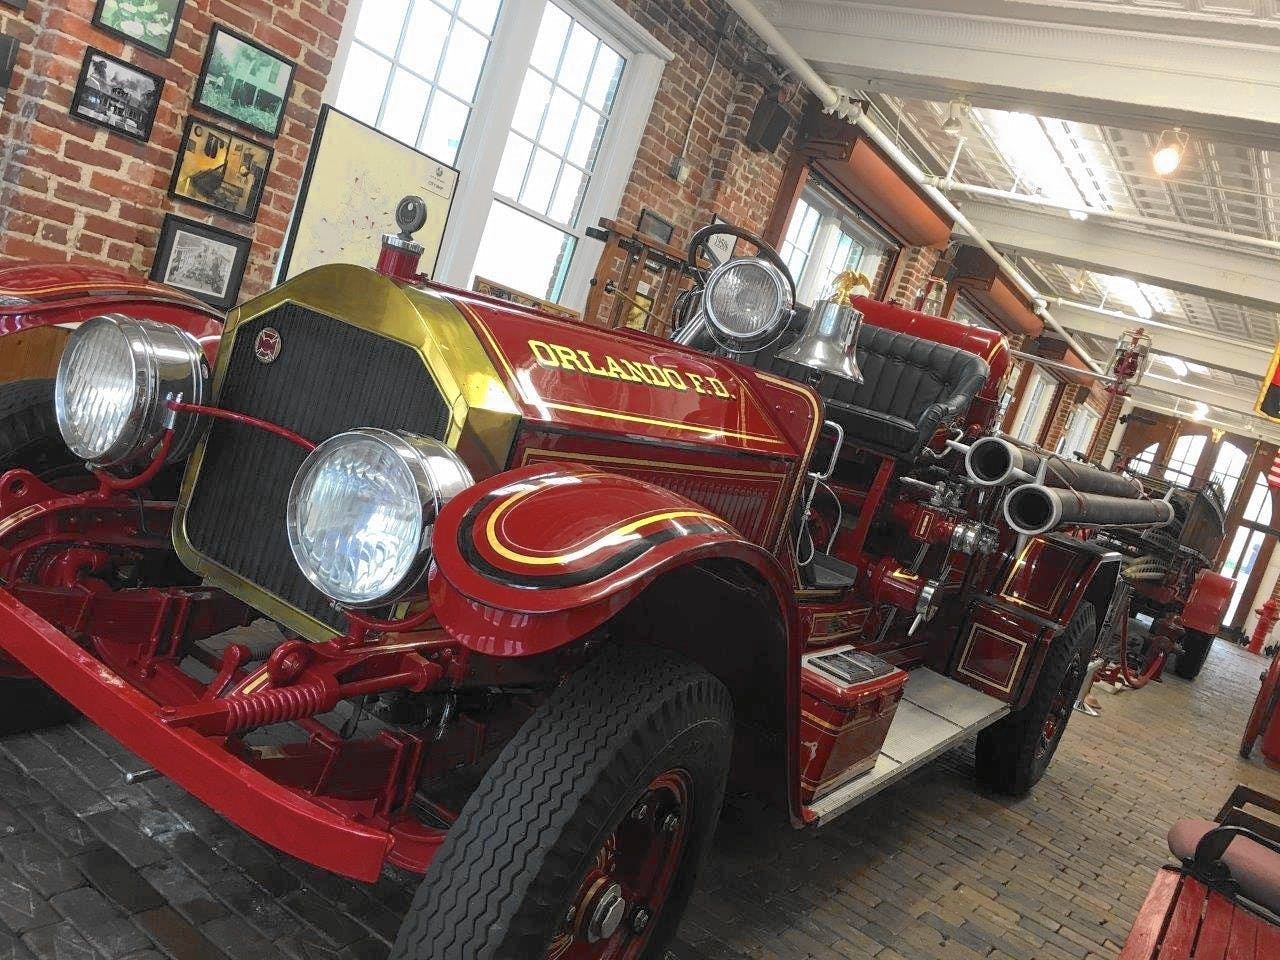 Free Things to Do in Orlando: Orlando Fire Museum